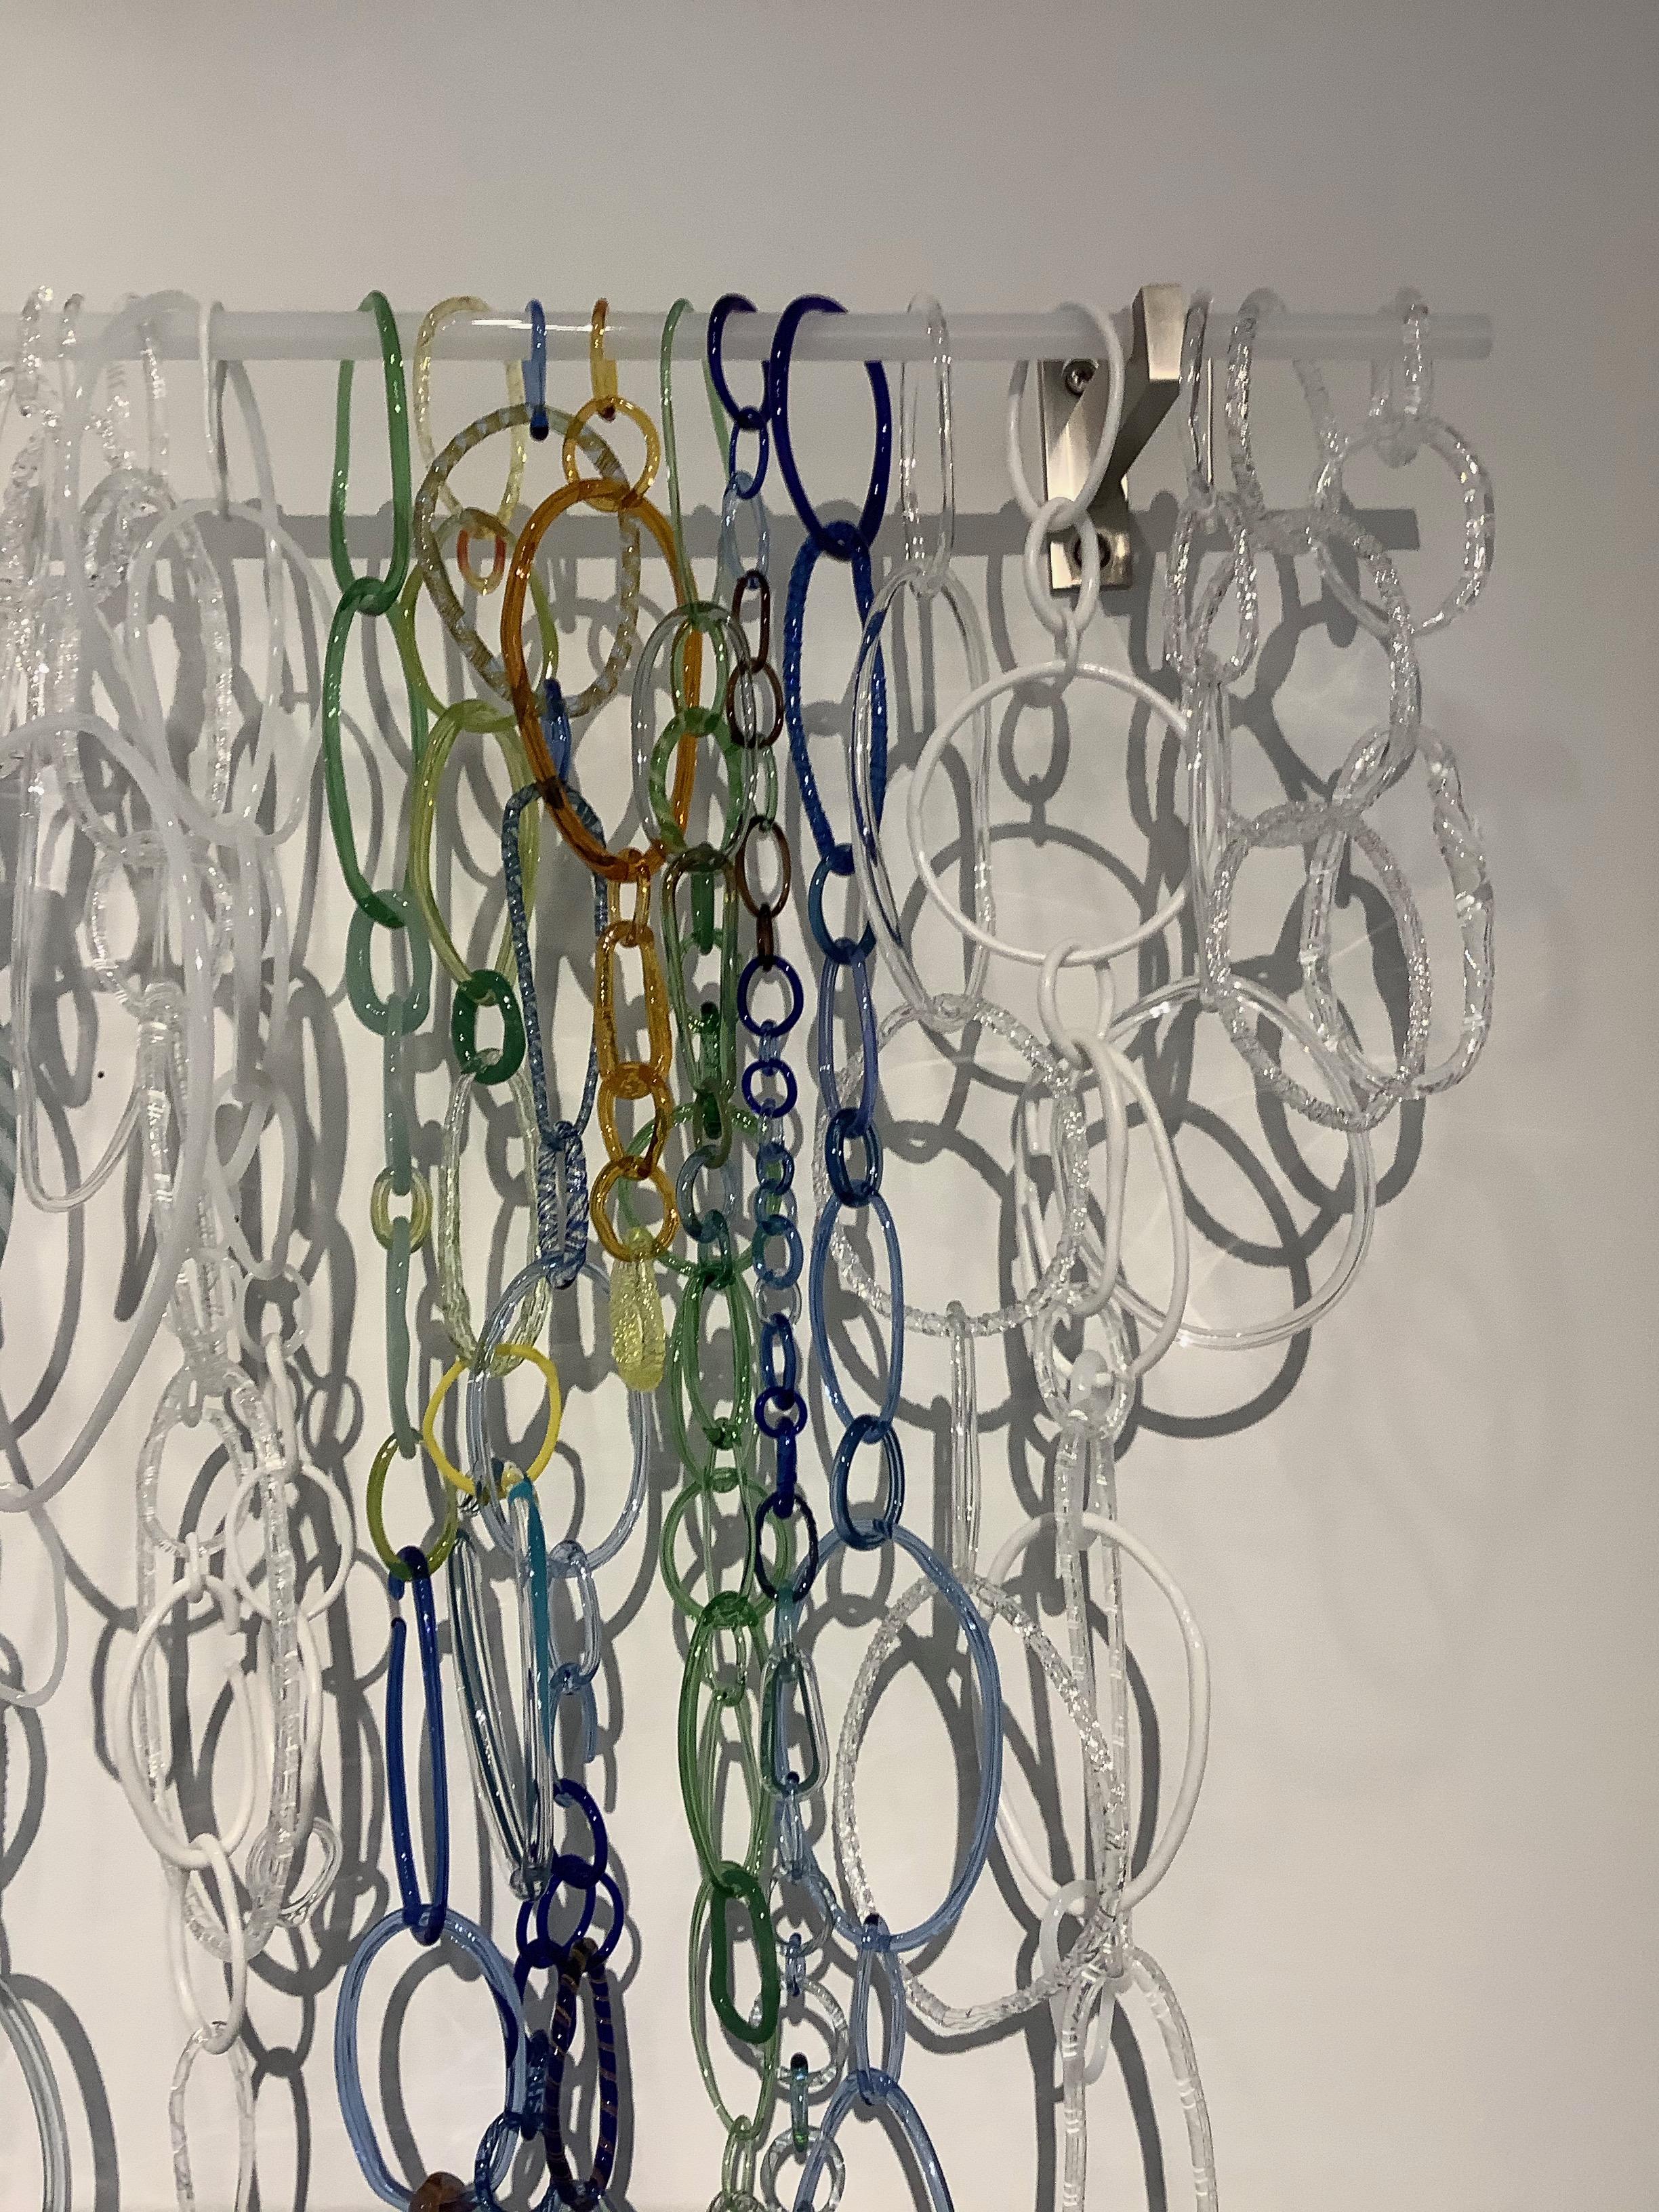 This hanging sculpture by David Licata is composed of free-form circular and oval loops of torch-worked borosilicate glass in white, clear, green, cobalt, golden orange, yellow and golden pink. The loops, in varying sizes and textures, cascade